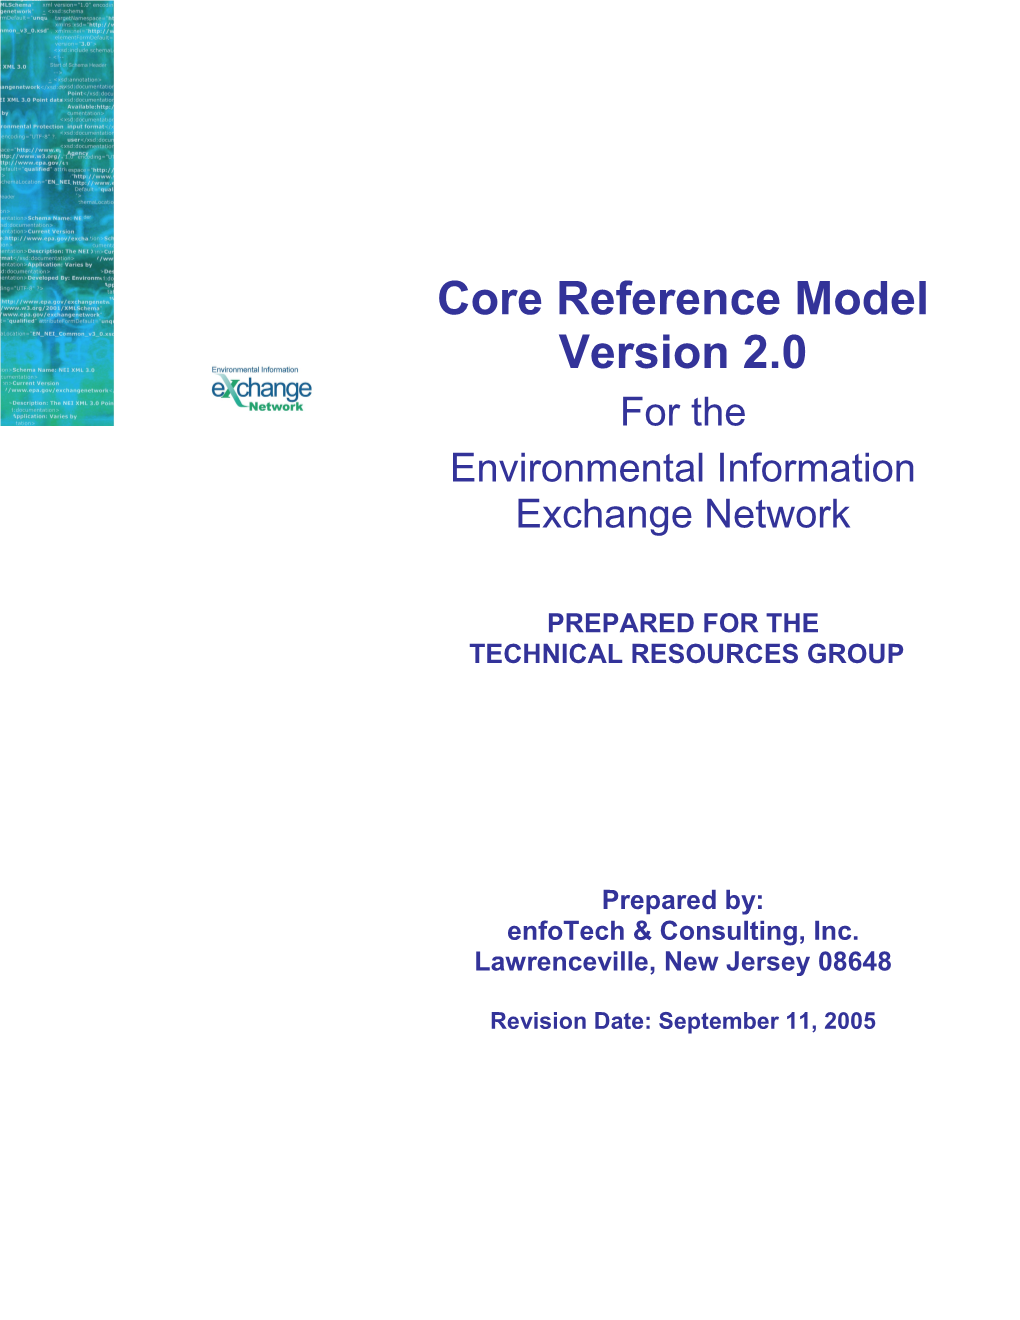 Core Reference Model Version 2.0